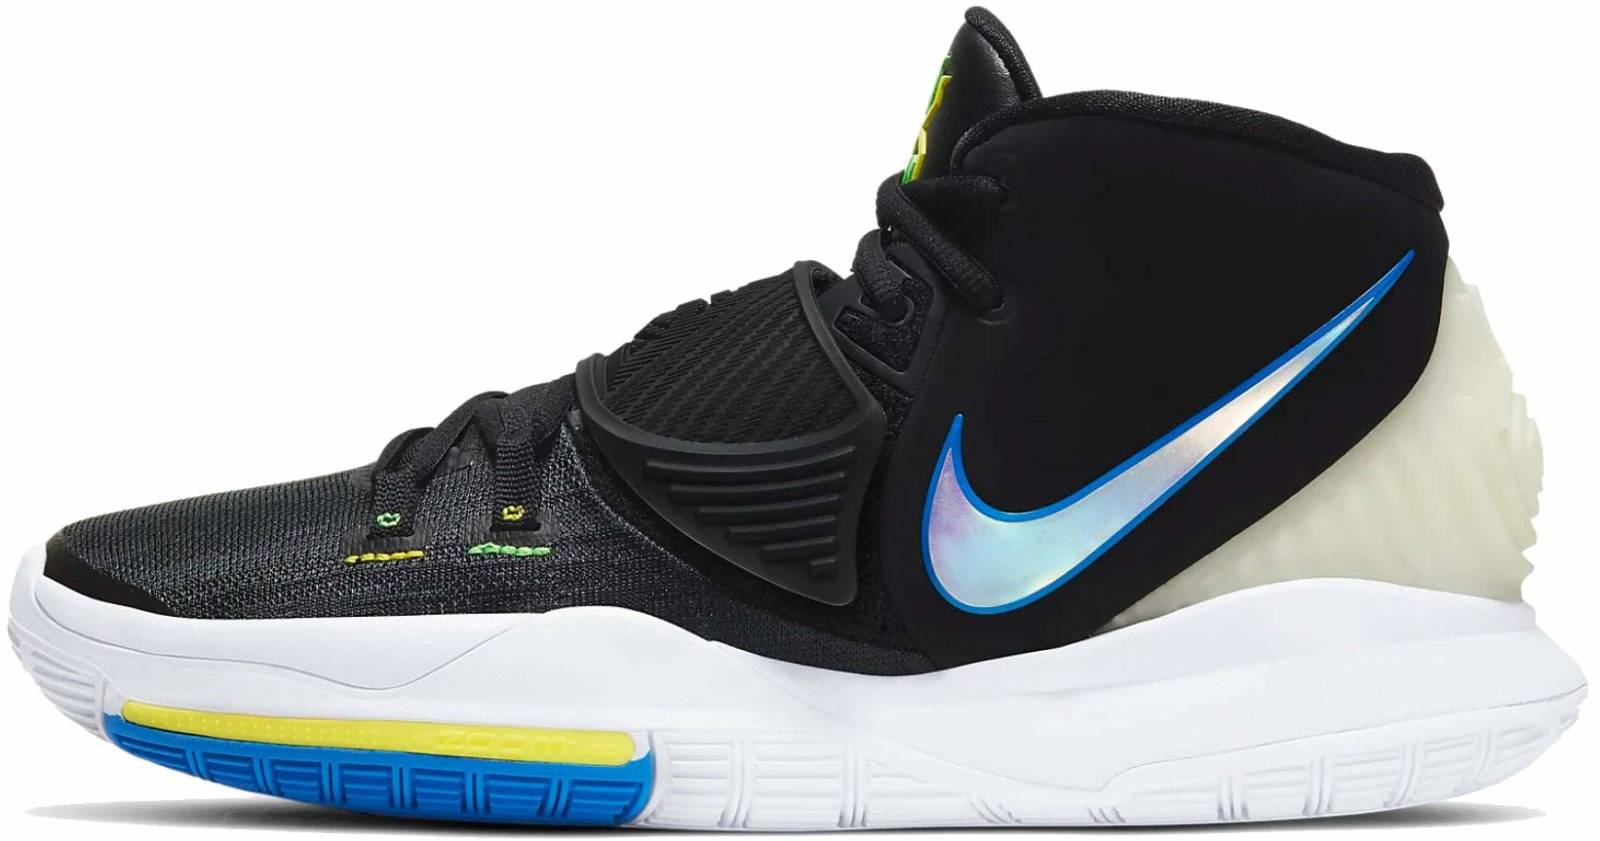 kyrie irving mens basketball shoes